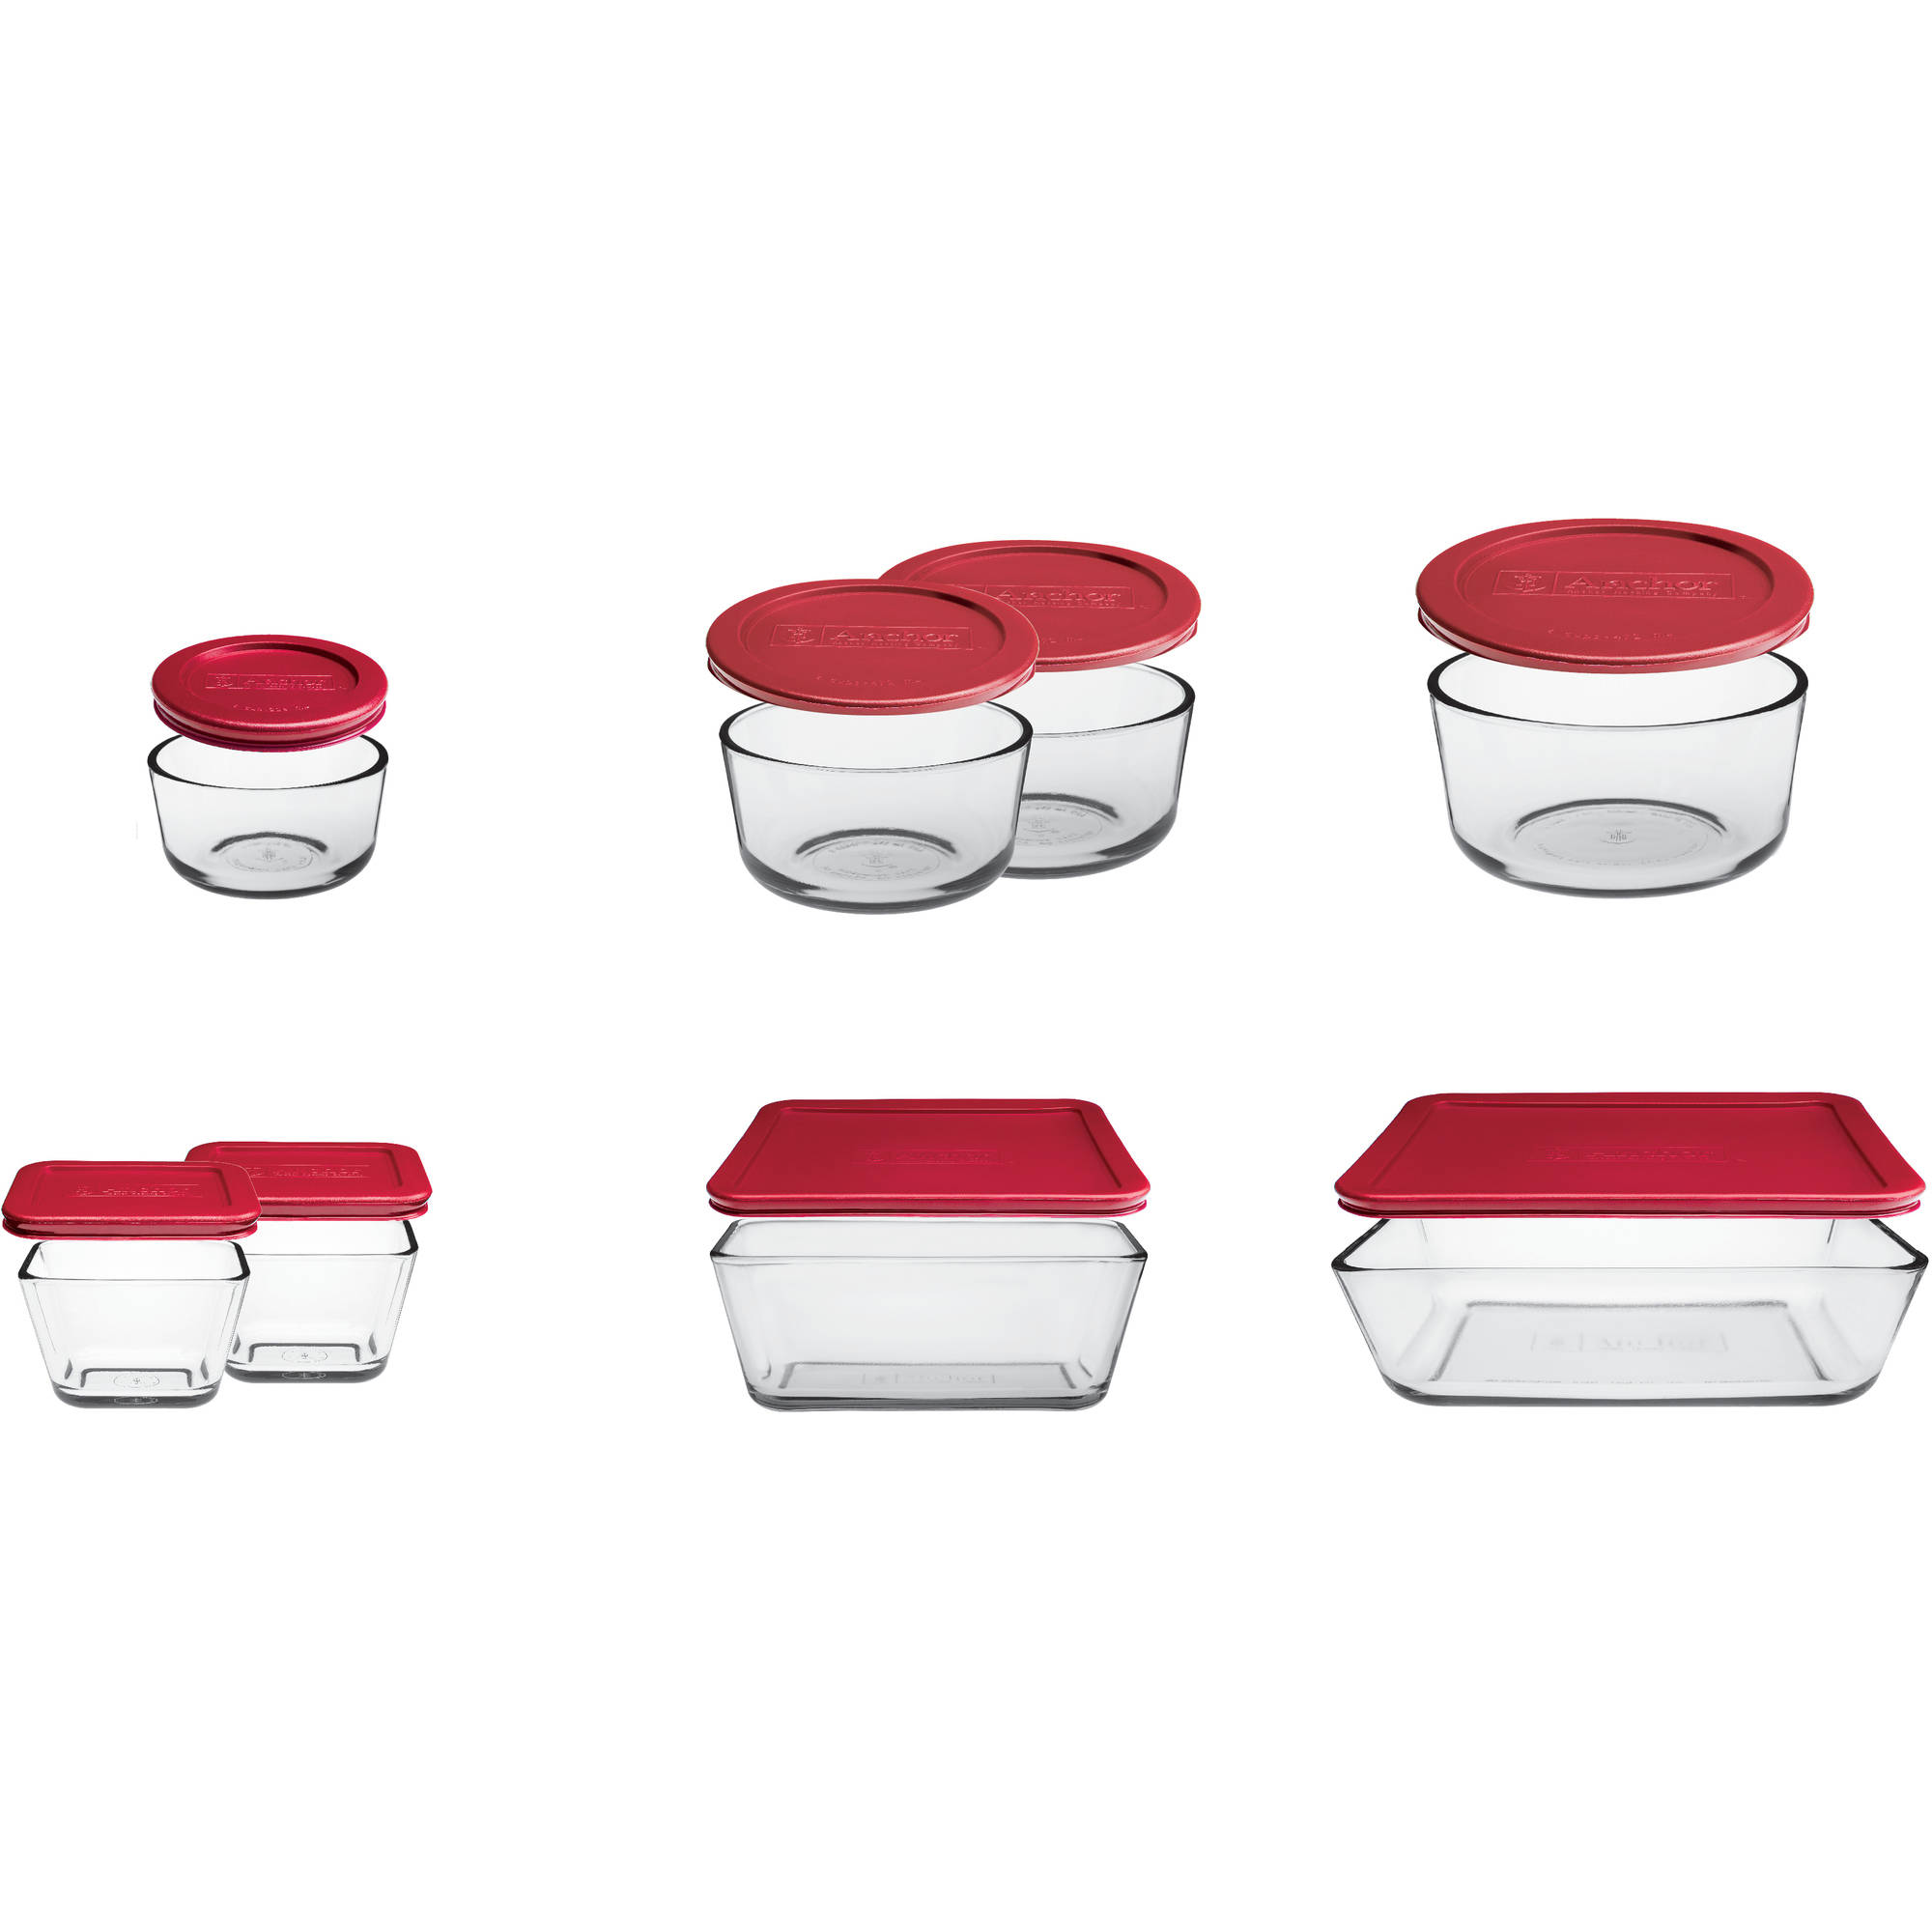 Anchor Hocking 16-Piece Kitchen Food Storage Set with Red Lids - image 1 of 2